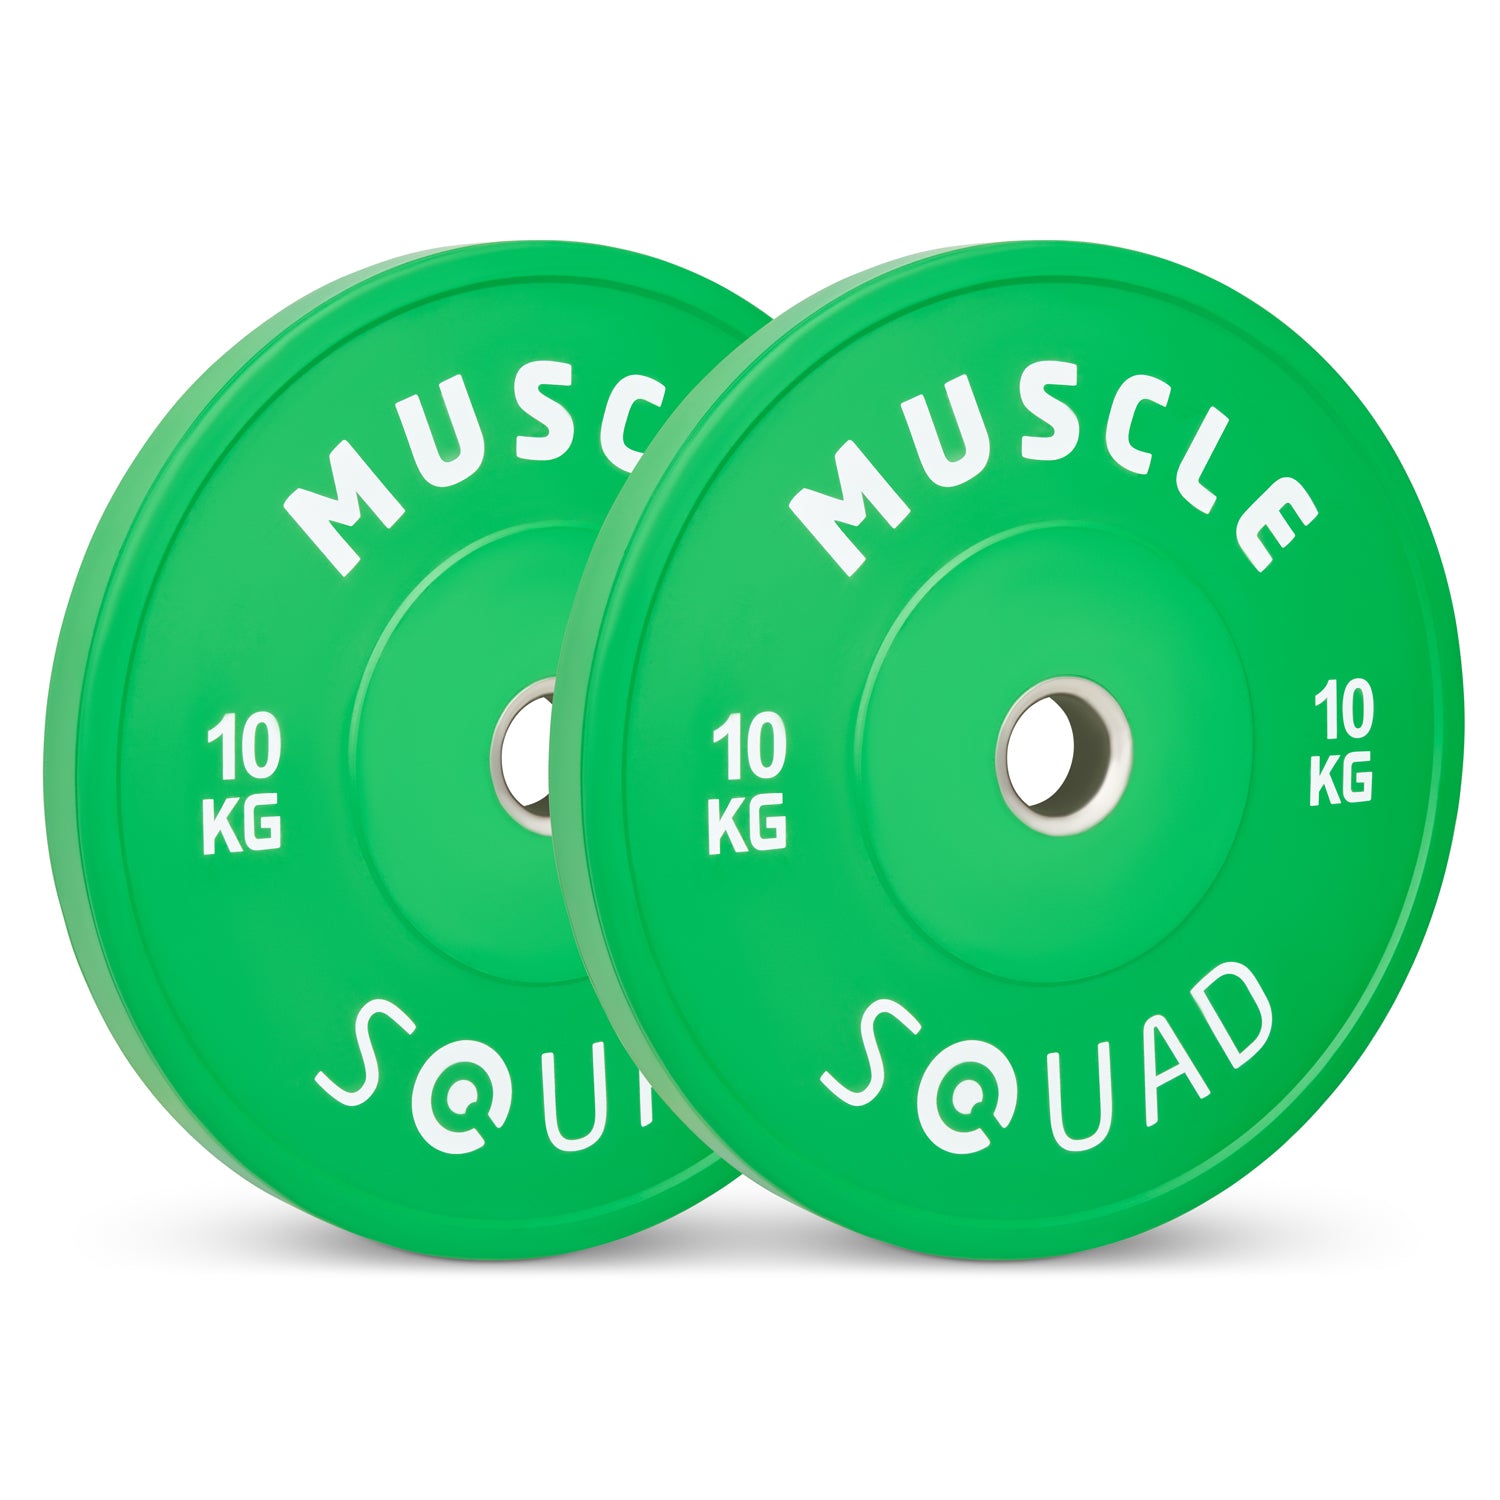 MuscleSquad 10kg Green Olympic Weight Plates